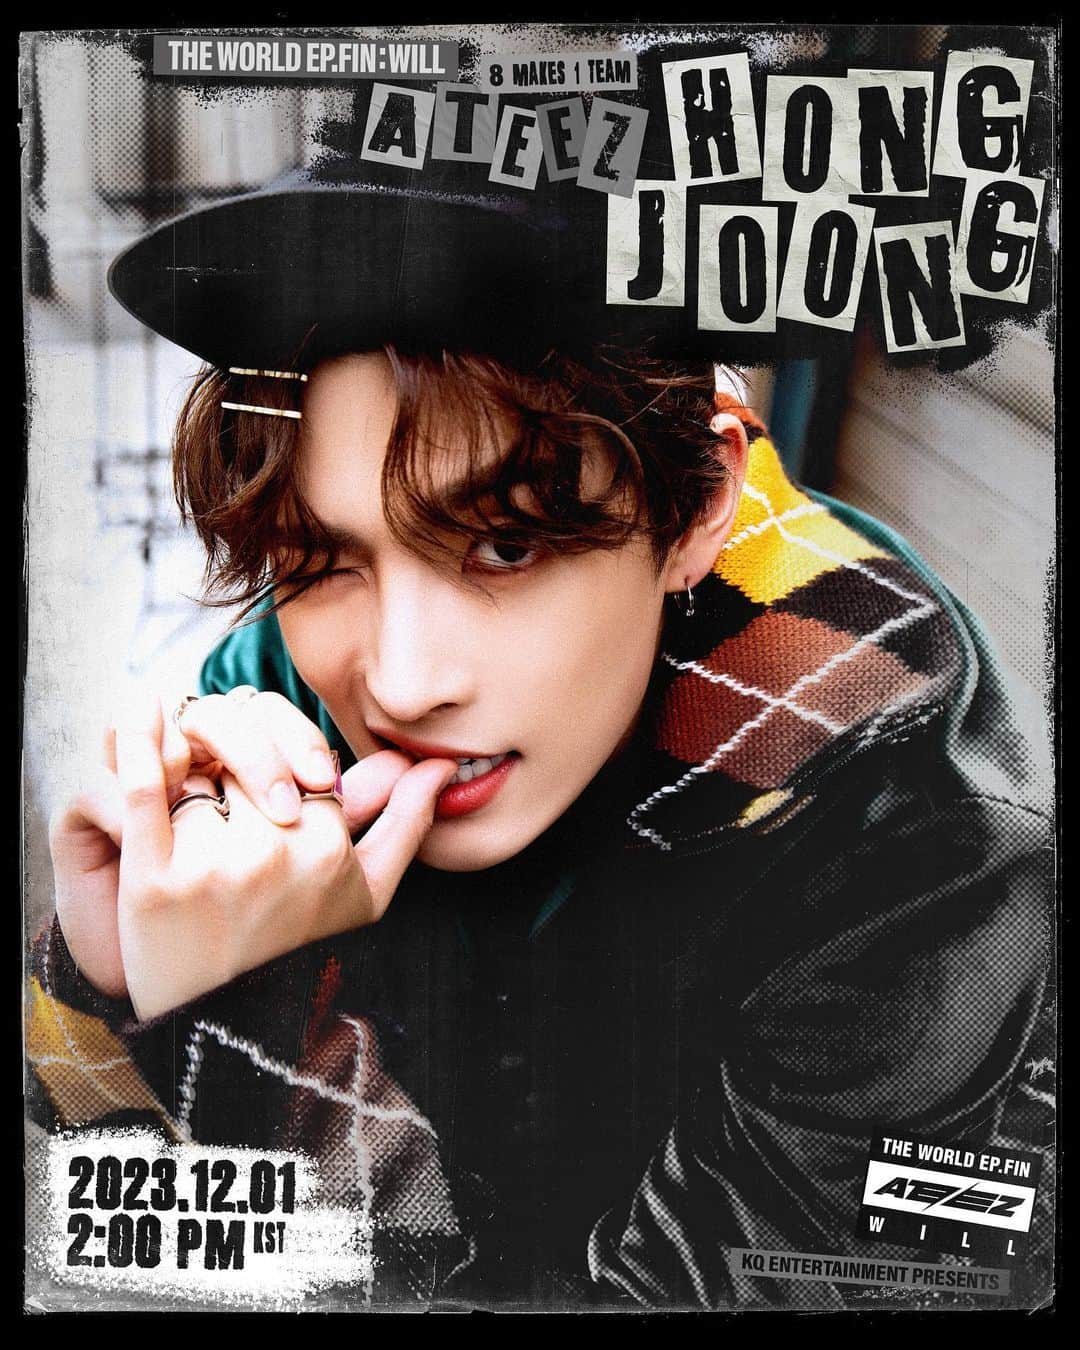 ATEEZのインスタグラム：「[📷] ATEEZ(에이티즈) THE WORLD EP.FIN : WILL Character Poster ⠀ 2023. 12. 01 2PM RELEASE ⠀ #WILL #미친폼 #Crazy_Form #ATEEZ #에이티즈 #HONGJOONG #홍중」